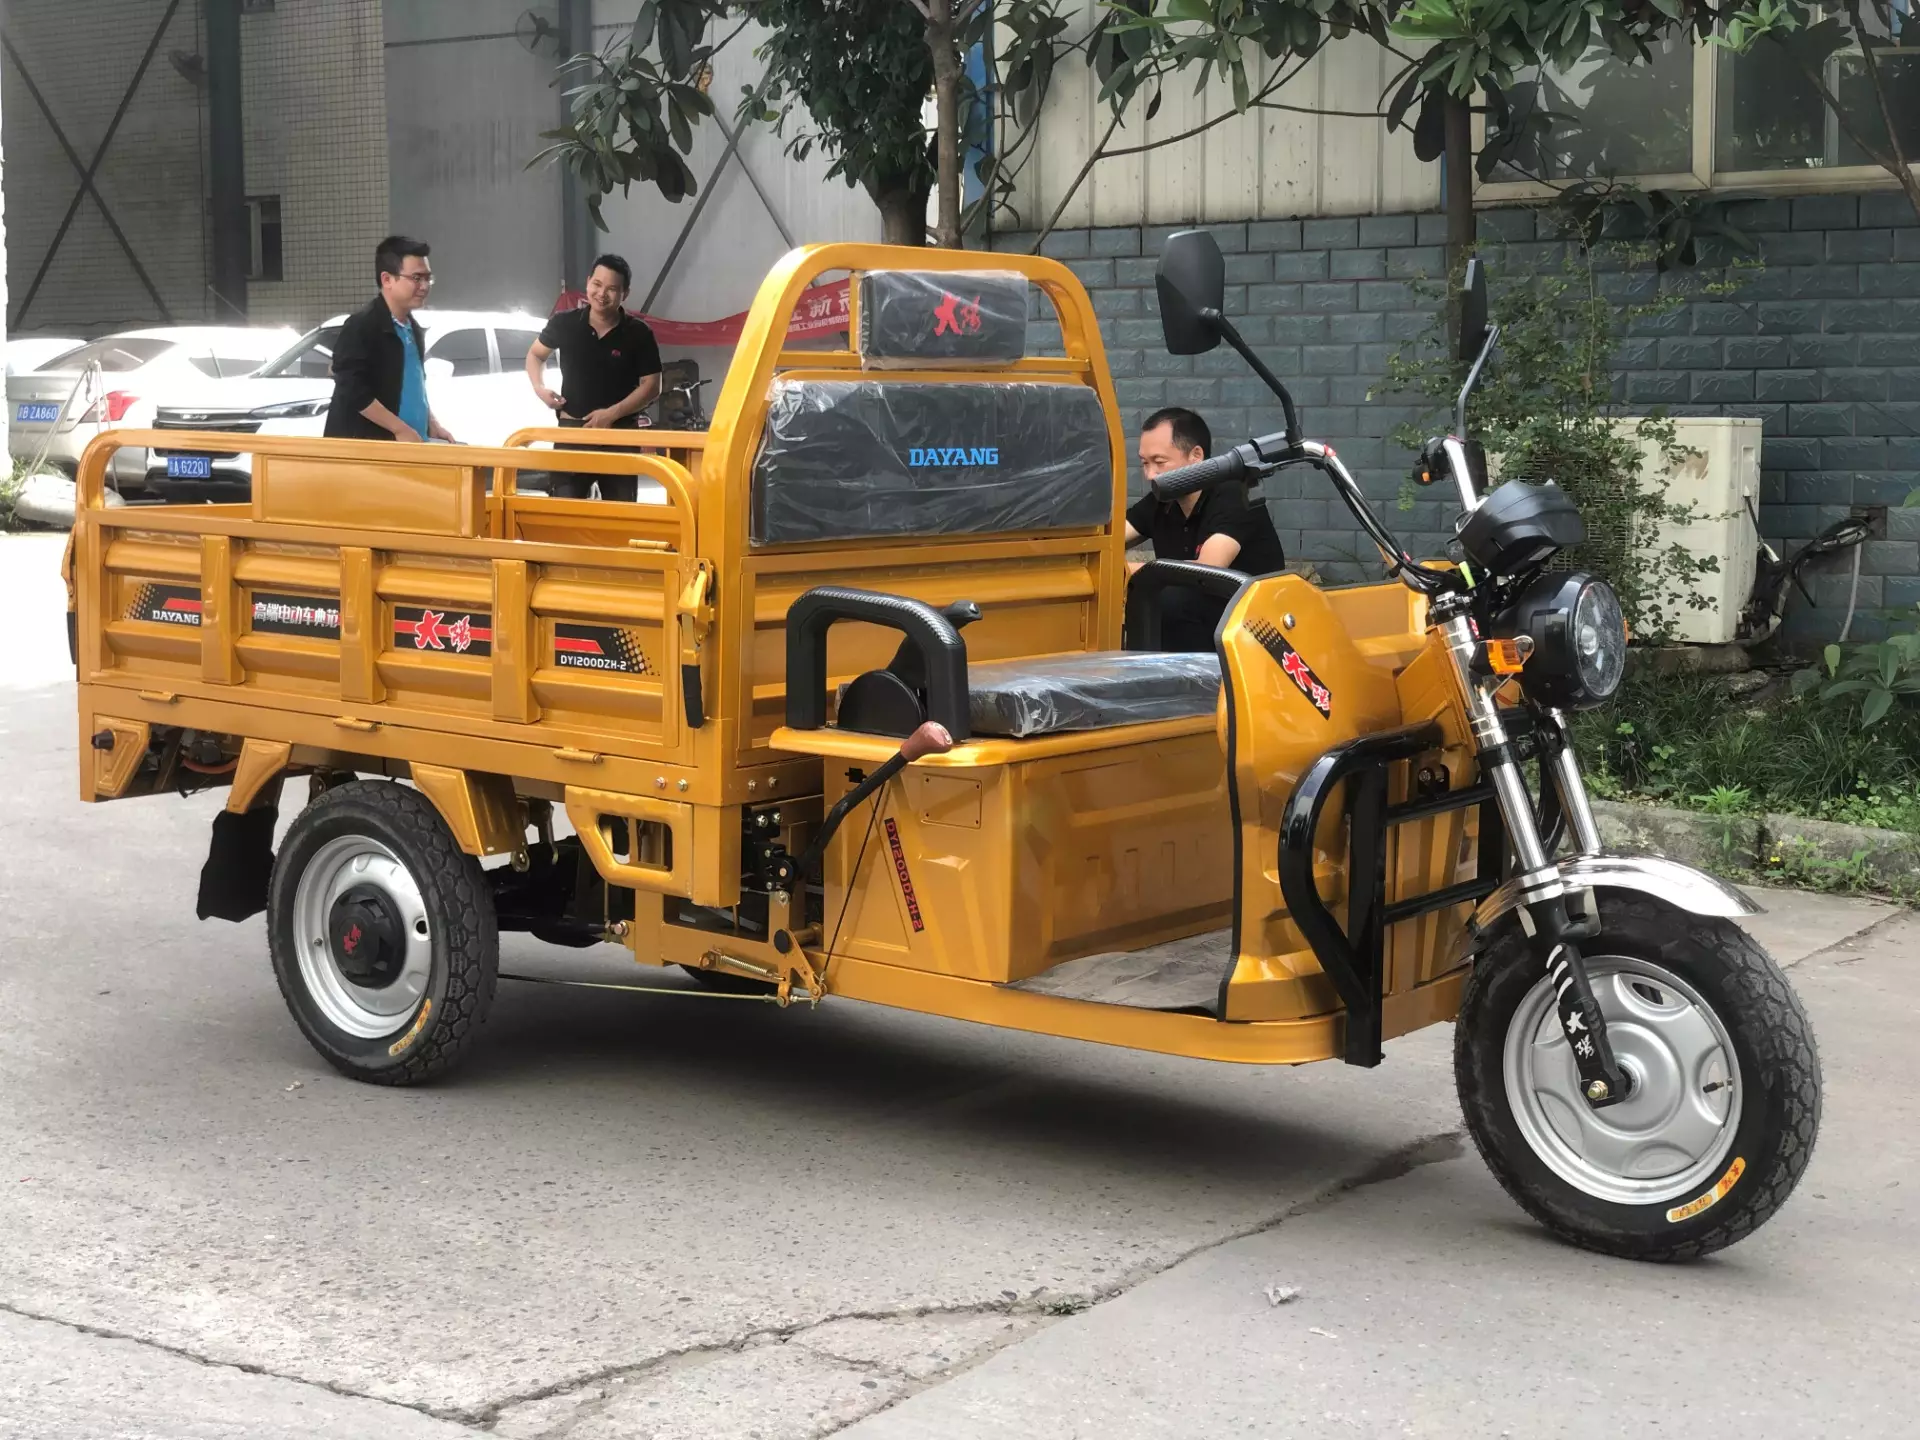 2021 Best Safety and Popular 72V 1000W  Electric Adult Tricycle for Cargo Max Body Trip Power Rickshaw yellow  Body OEM Lights